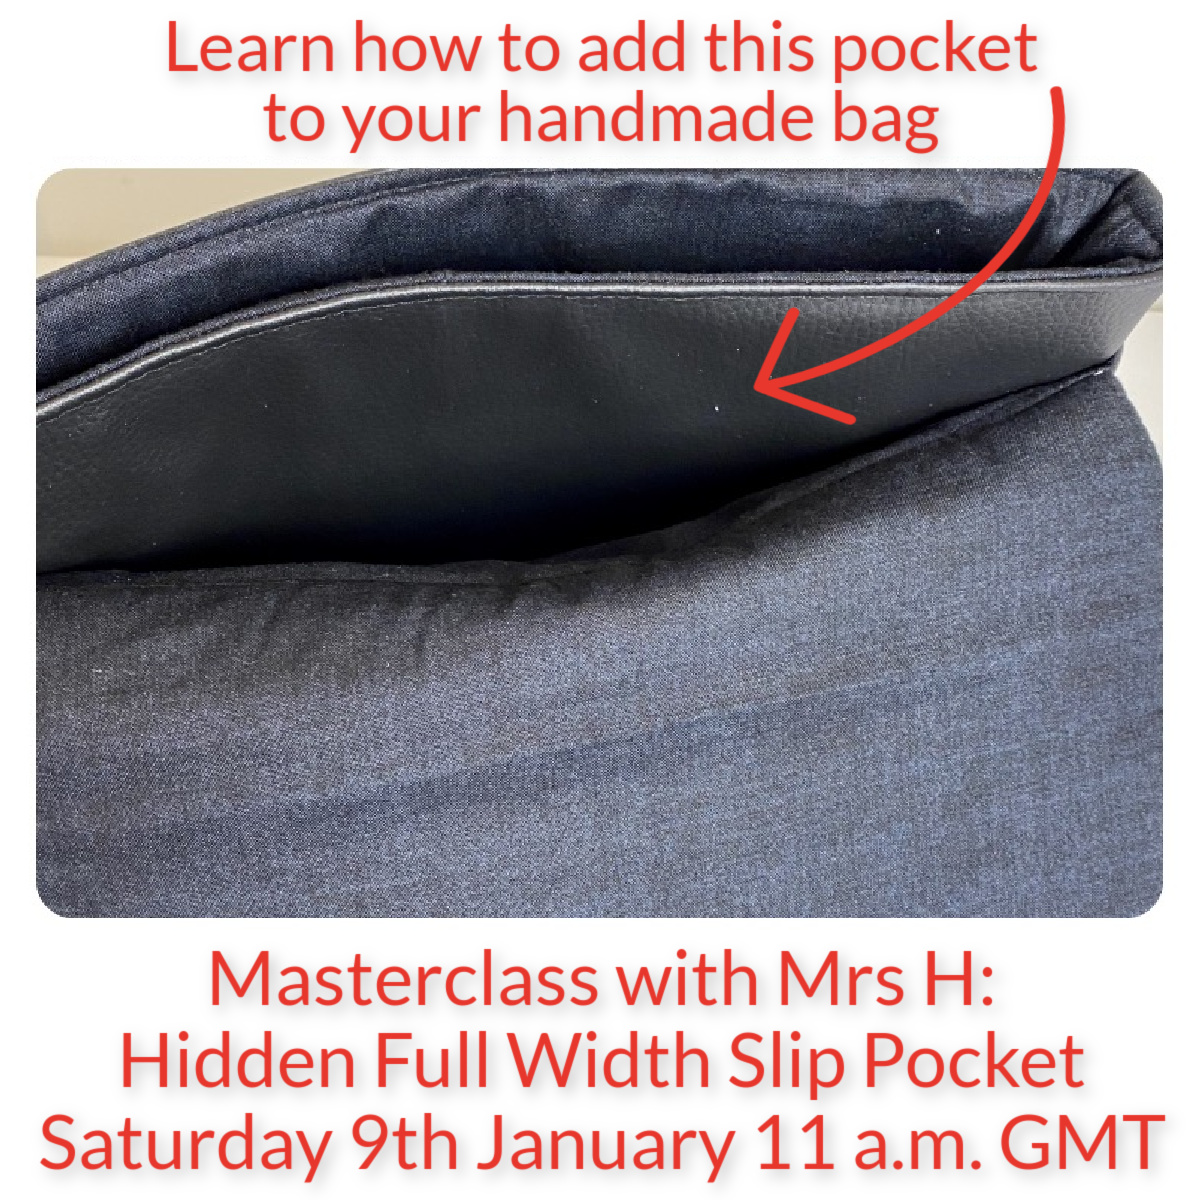 How to add a Hidden Full Width Slip Pocket to your Handmade Bag